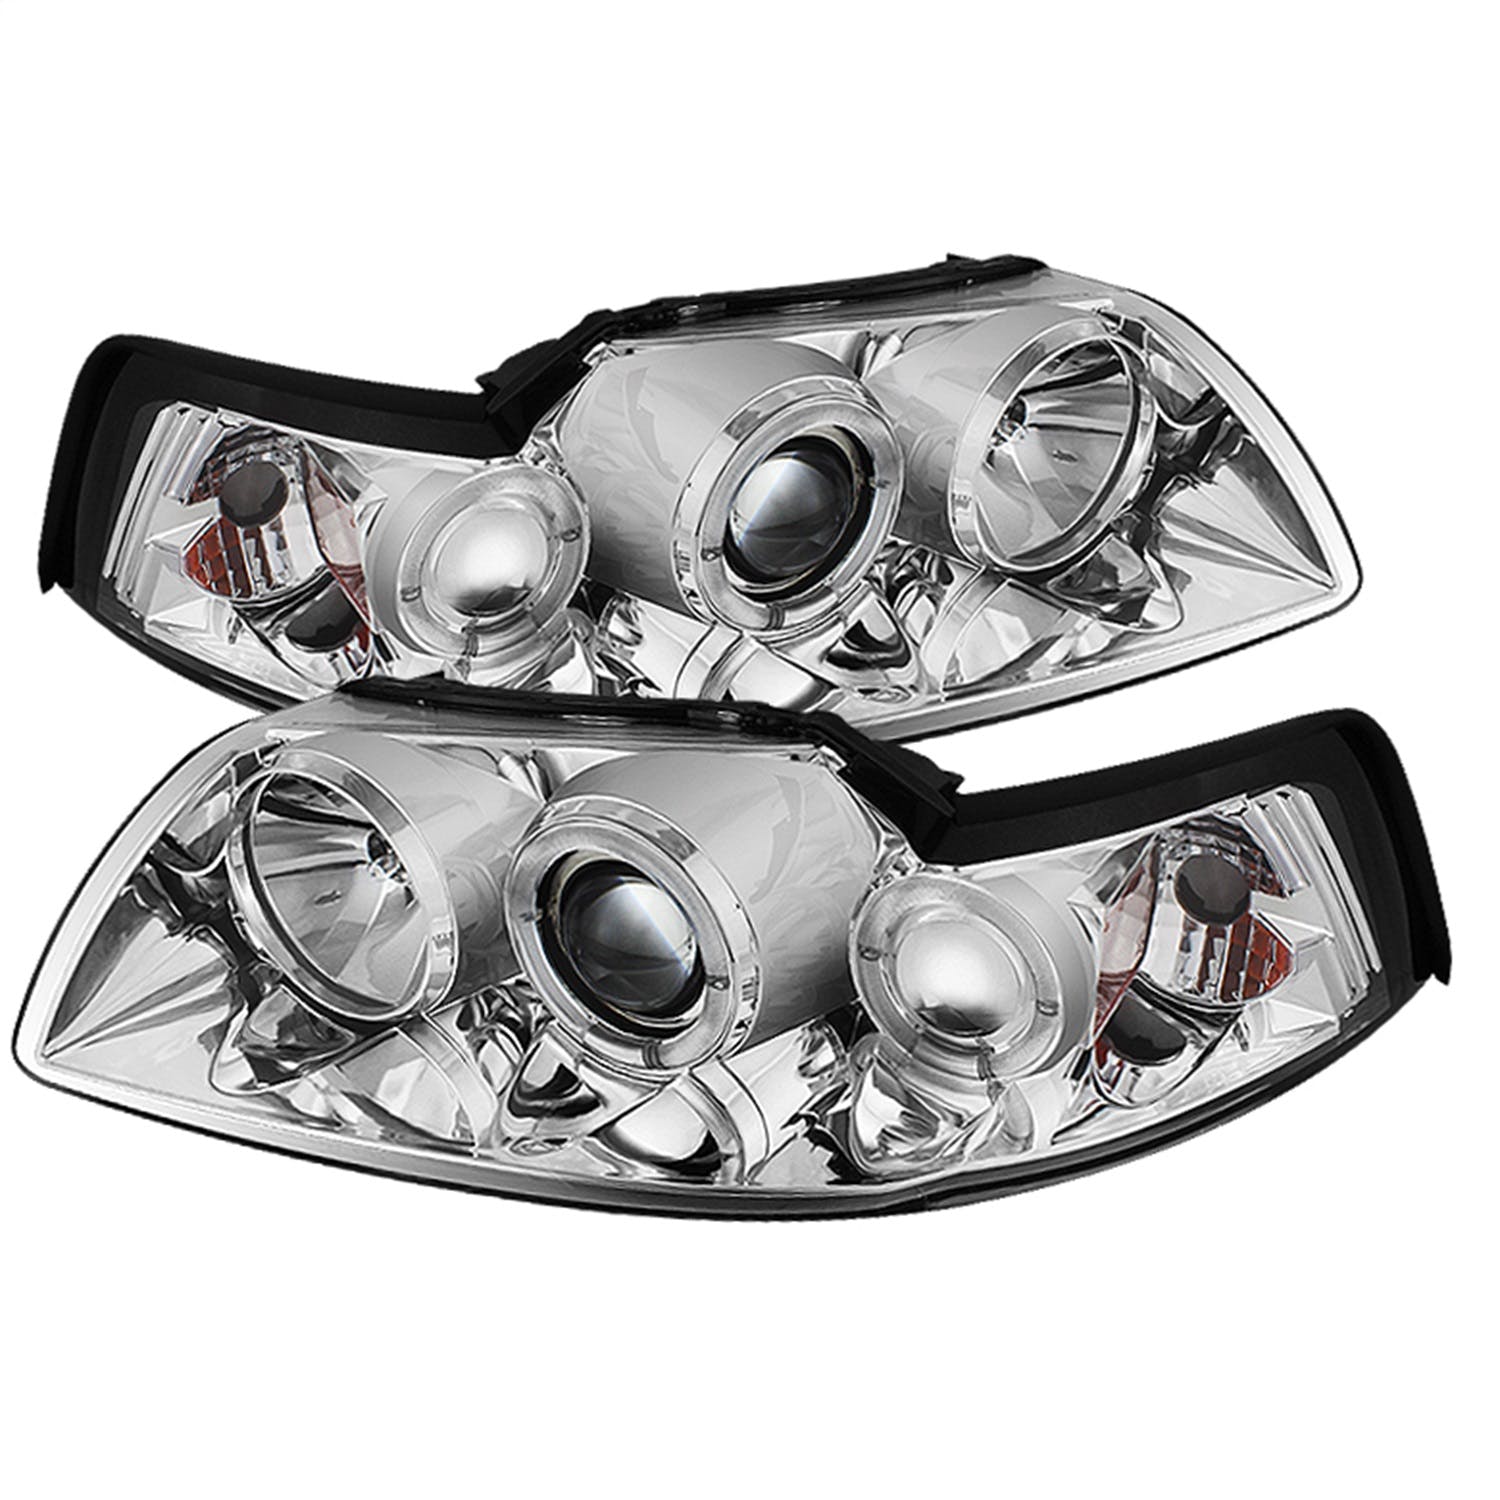 Spyder Auto 5010452 (Spyder) Ford Mustang 99-04 Projector Headlights-LED Halo-Chrome-High H1 (Includ